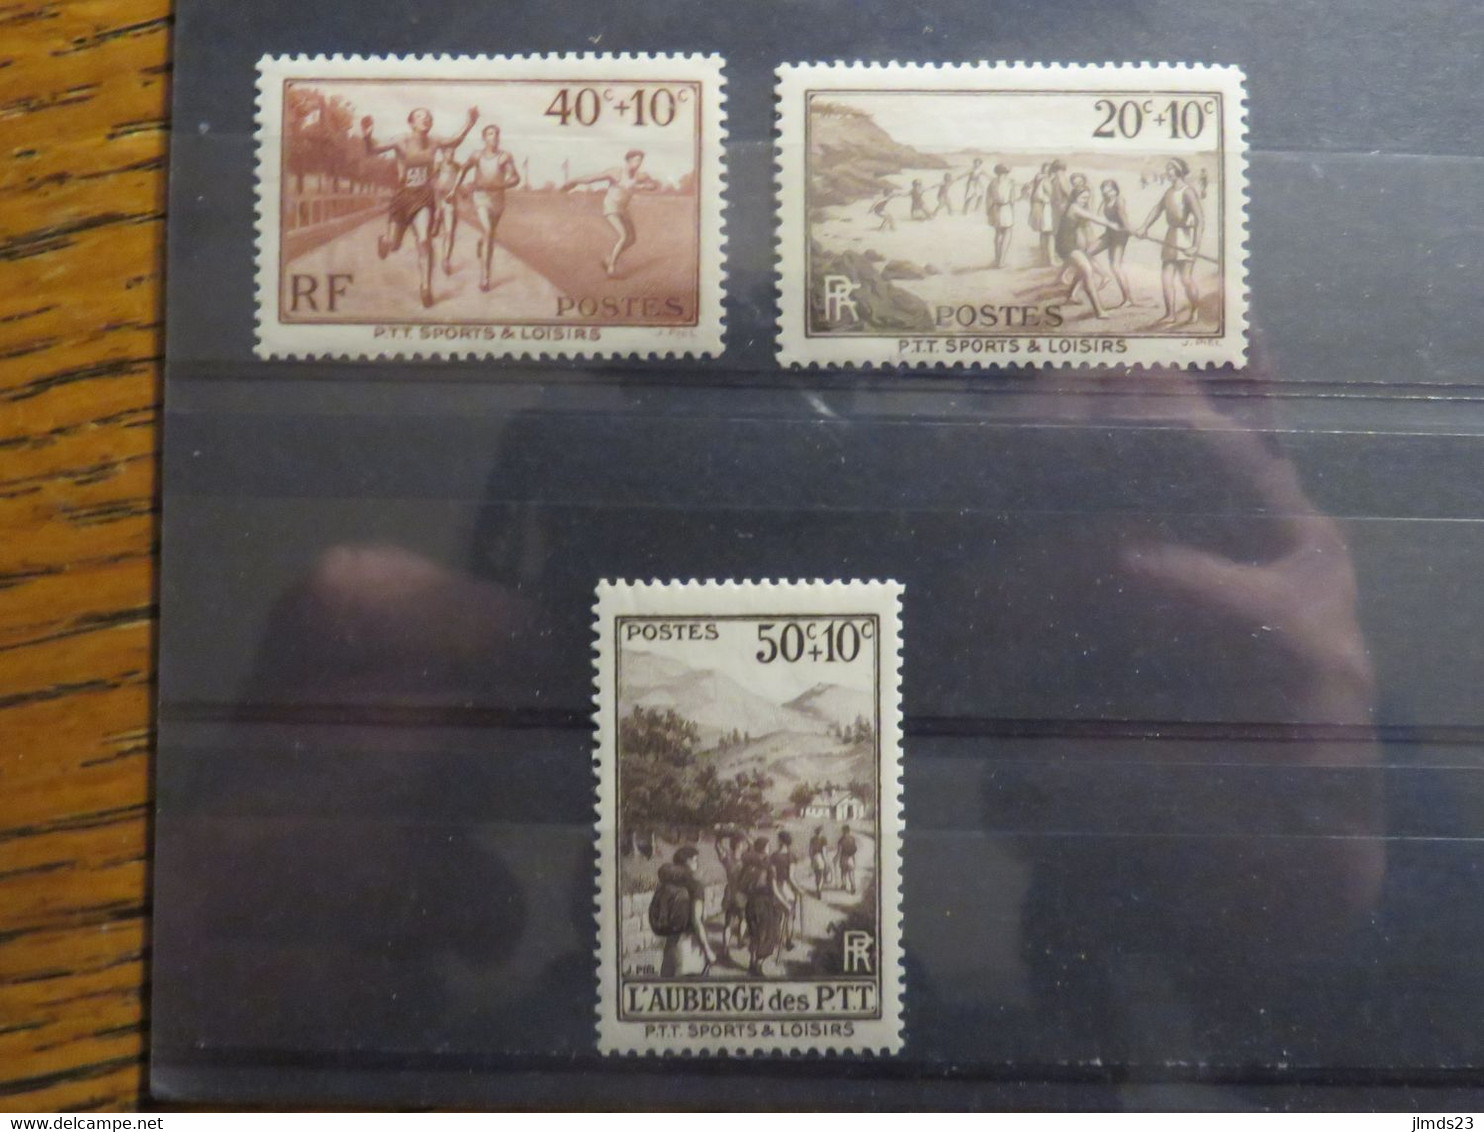 FRANCE, SERIE 345/347 LUXE** A 1 € - Neufs